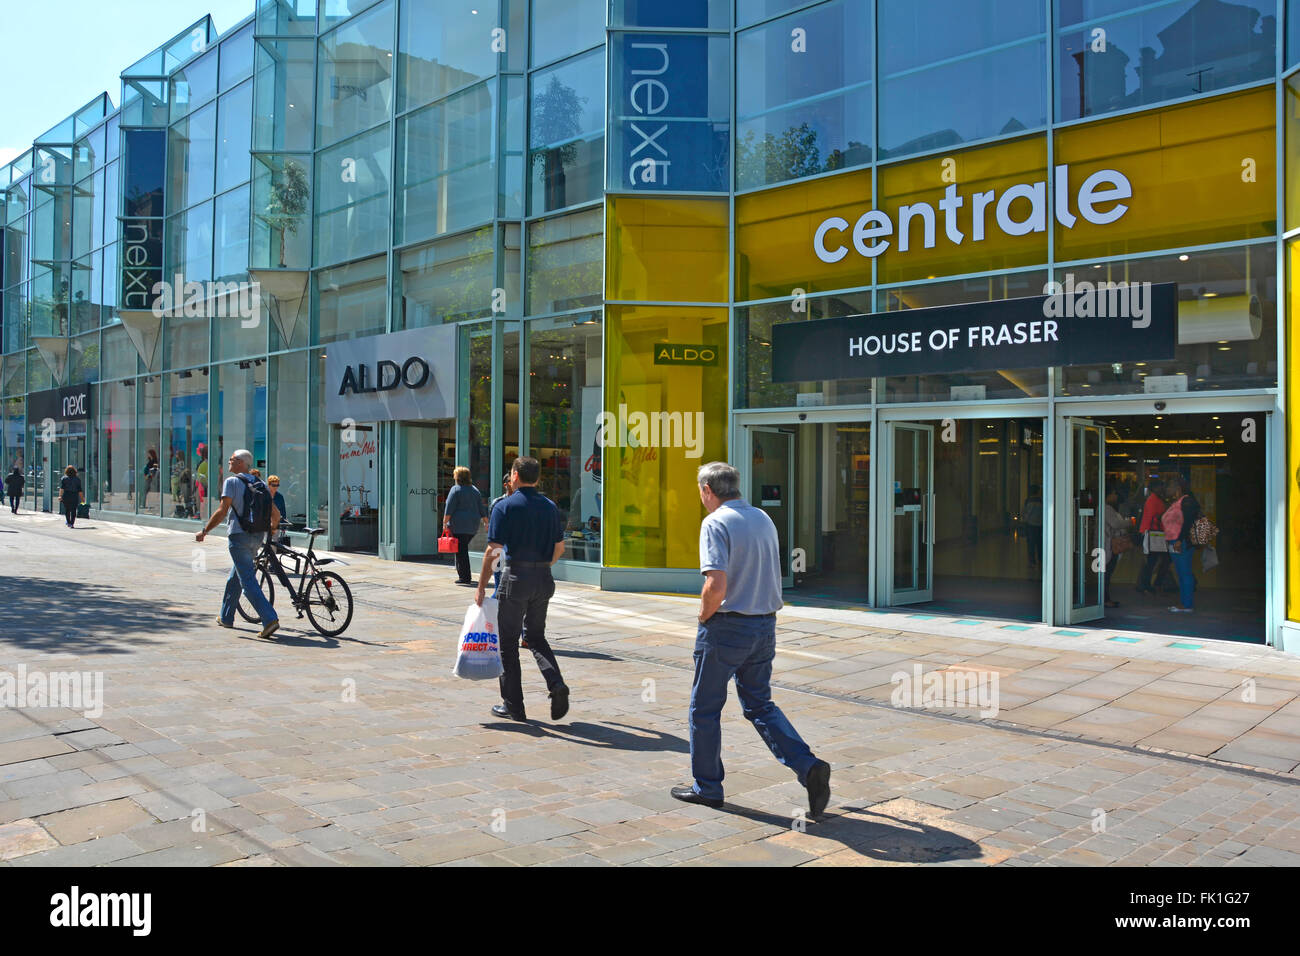 Croydon Centrale shopping malls entrance and House of Fraser department store in pedestrianised shoppers street in town centre South London England UK Stock Photo